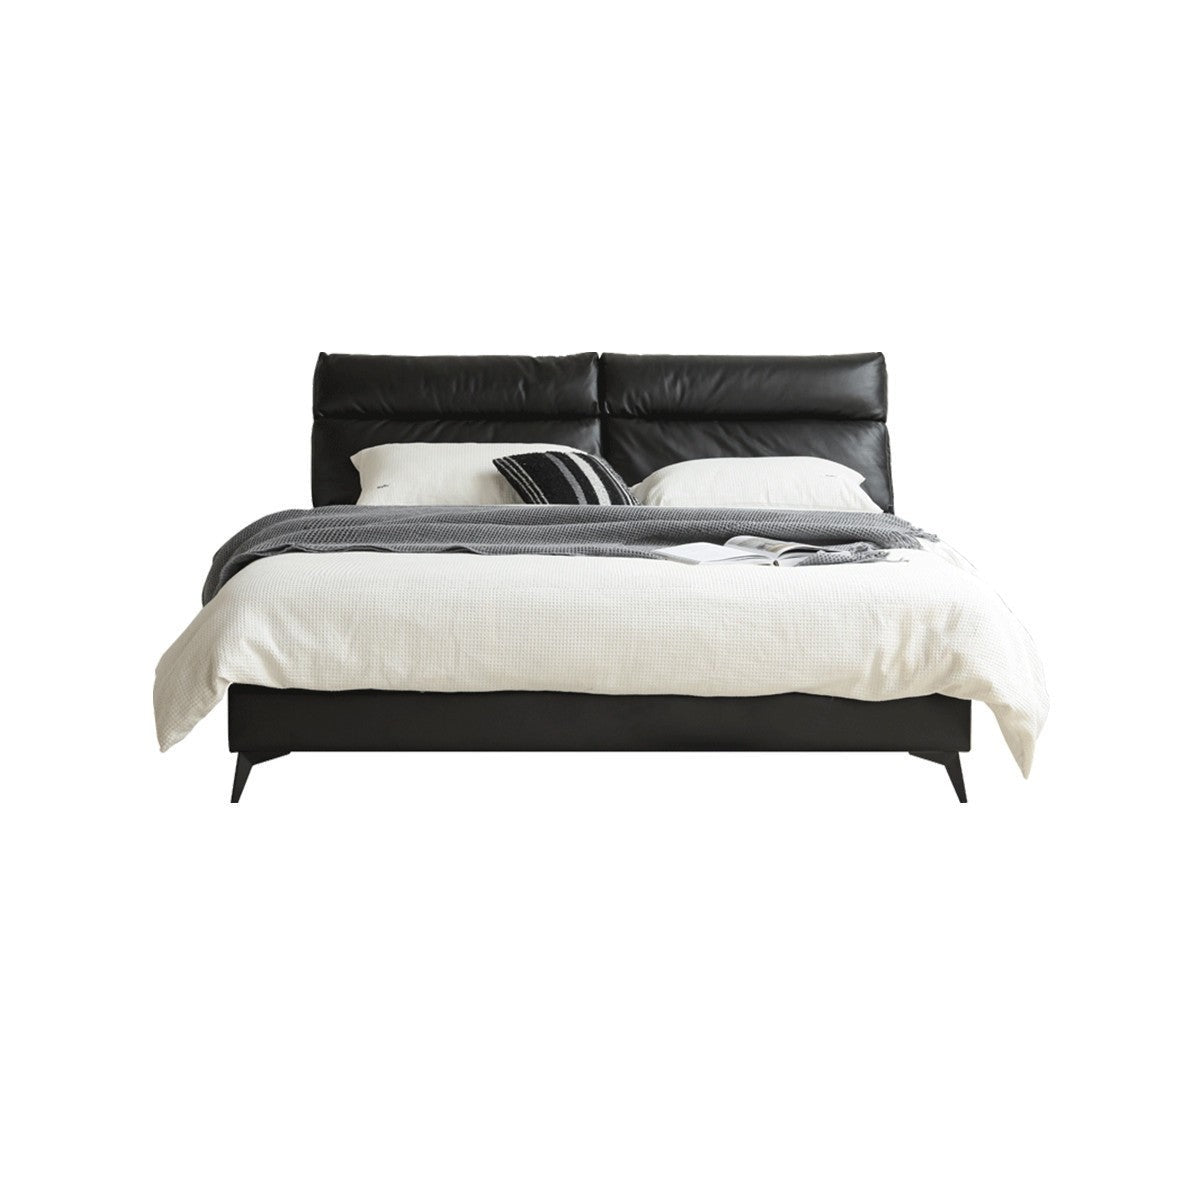 Leather Upholstered Bed with Down Filling"